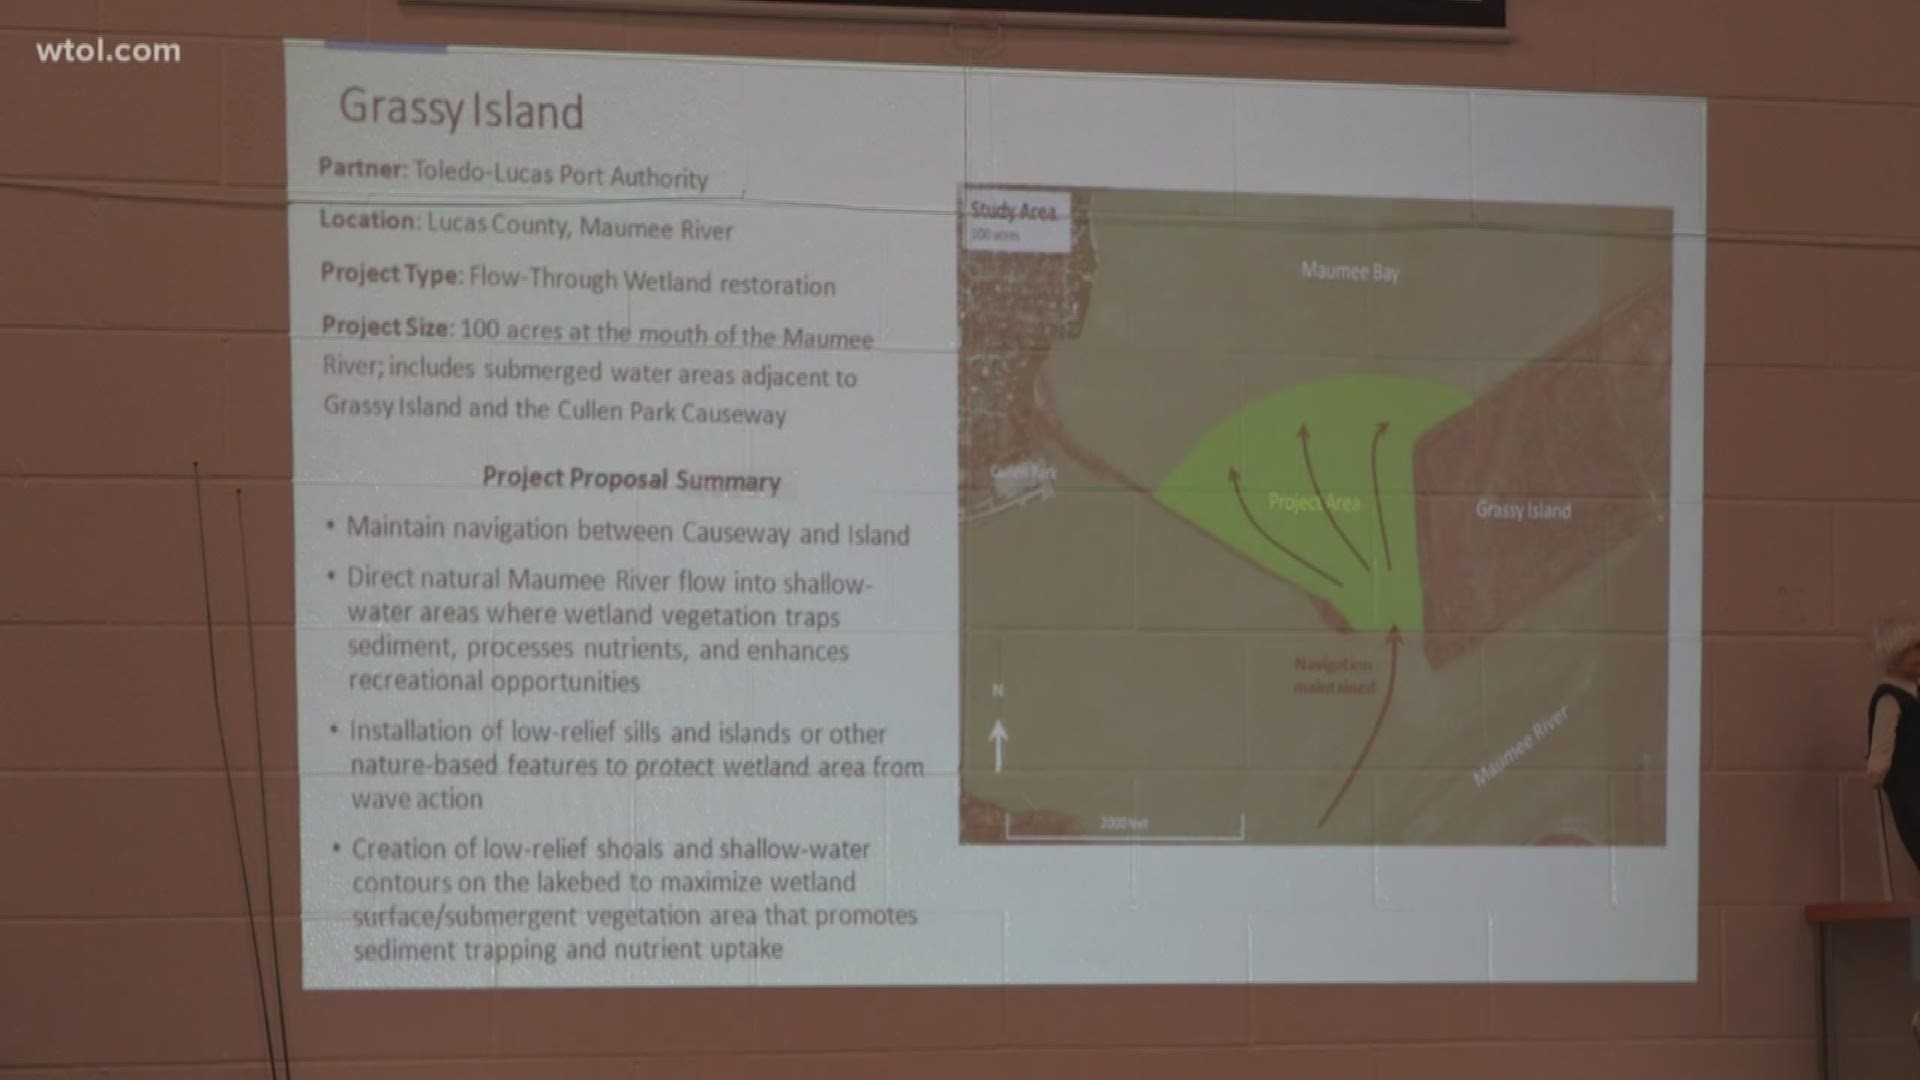 The Ohio Department of Natural Resources wants to develop wetlands in the area to prevent algal blooms in Lake Erie.